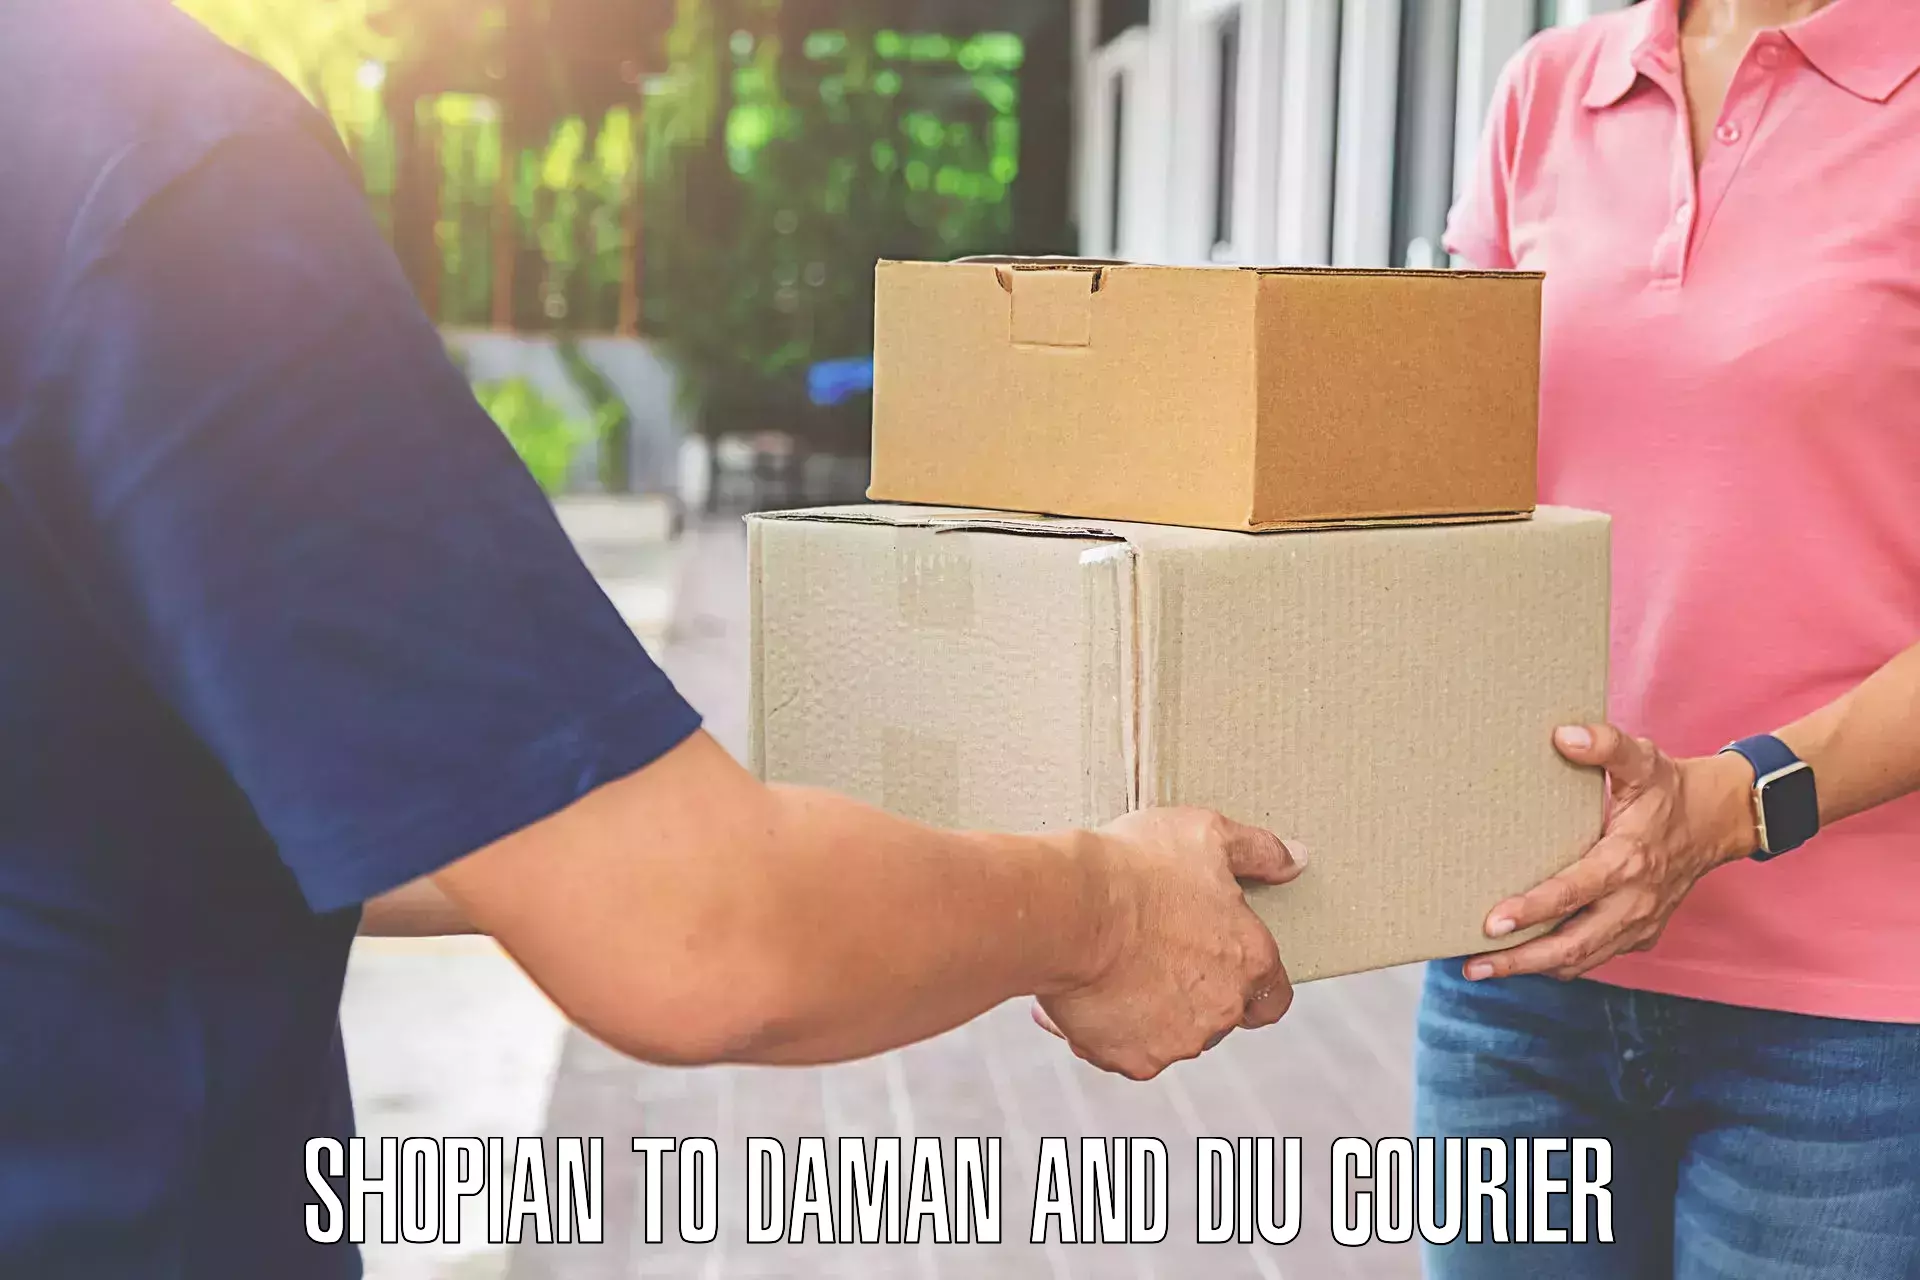 Instant baggage transport quote Shopian to Daman and Diu